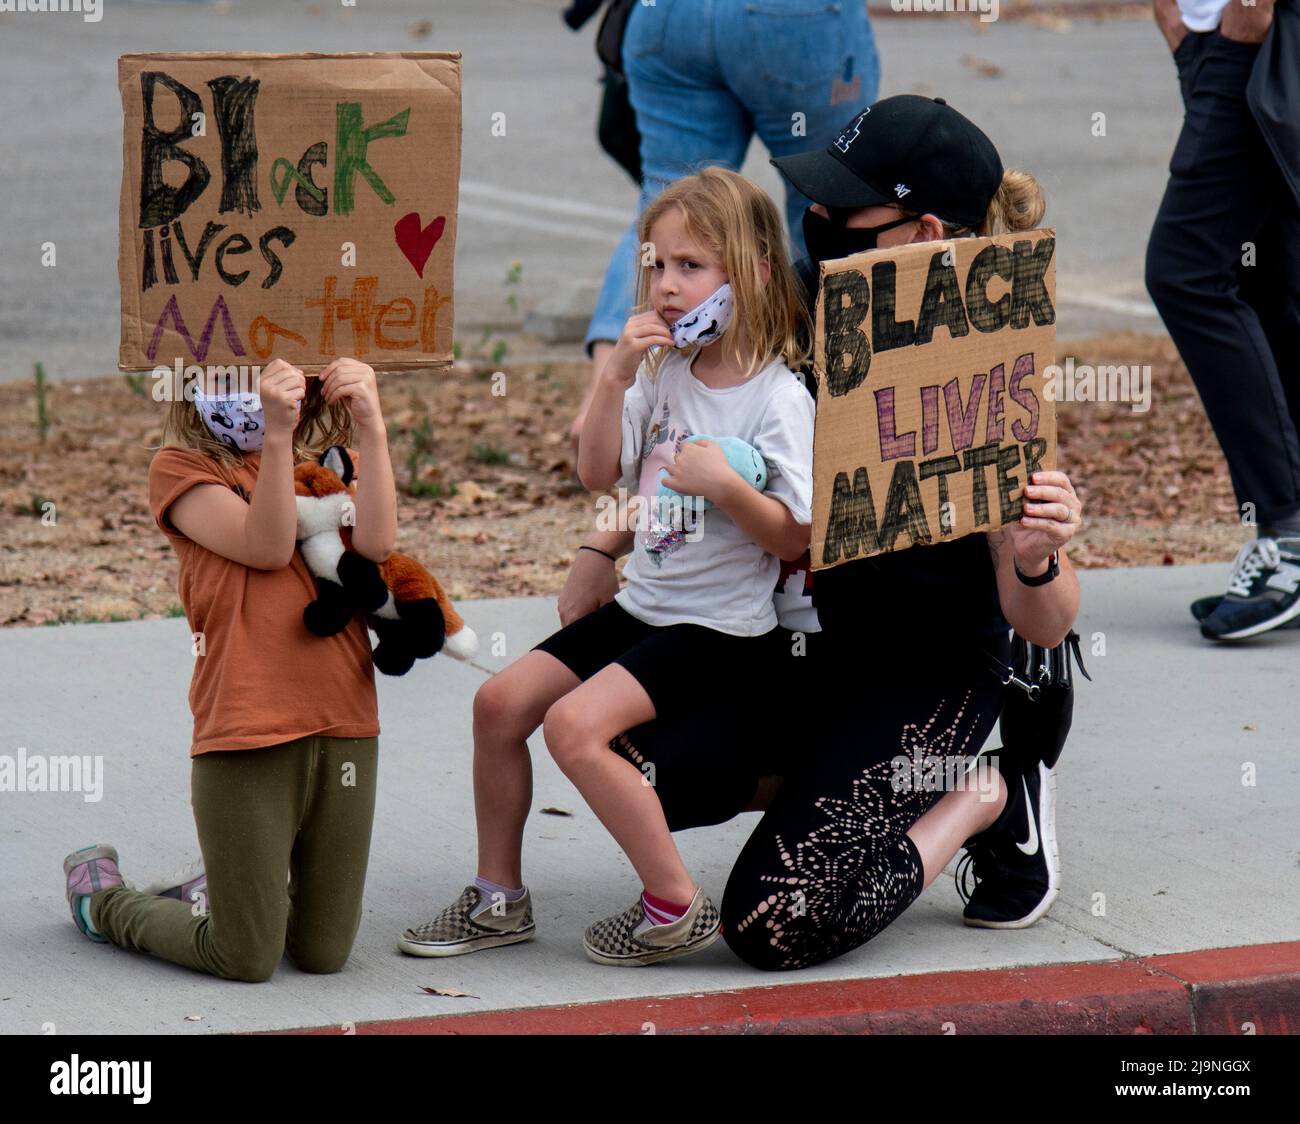 March through the streets of Los Angeles, CA for Human Rights Equality and Black Lives Matter protest. Stock Photo